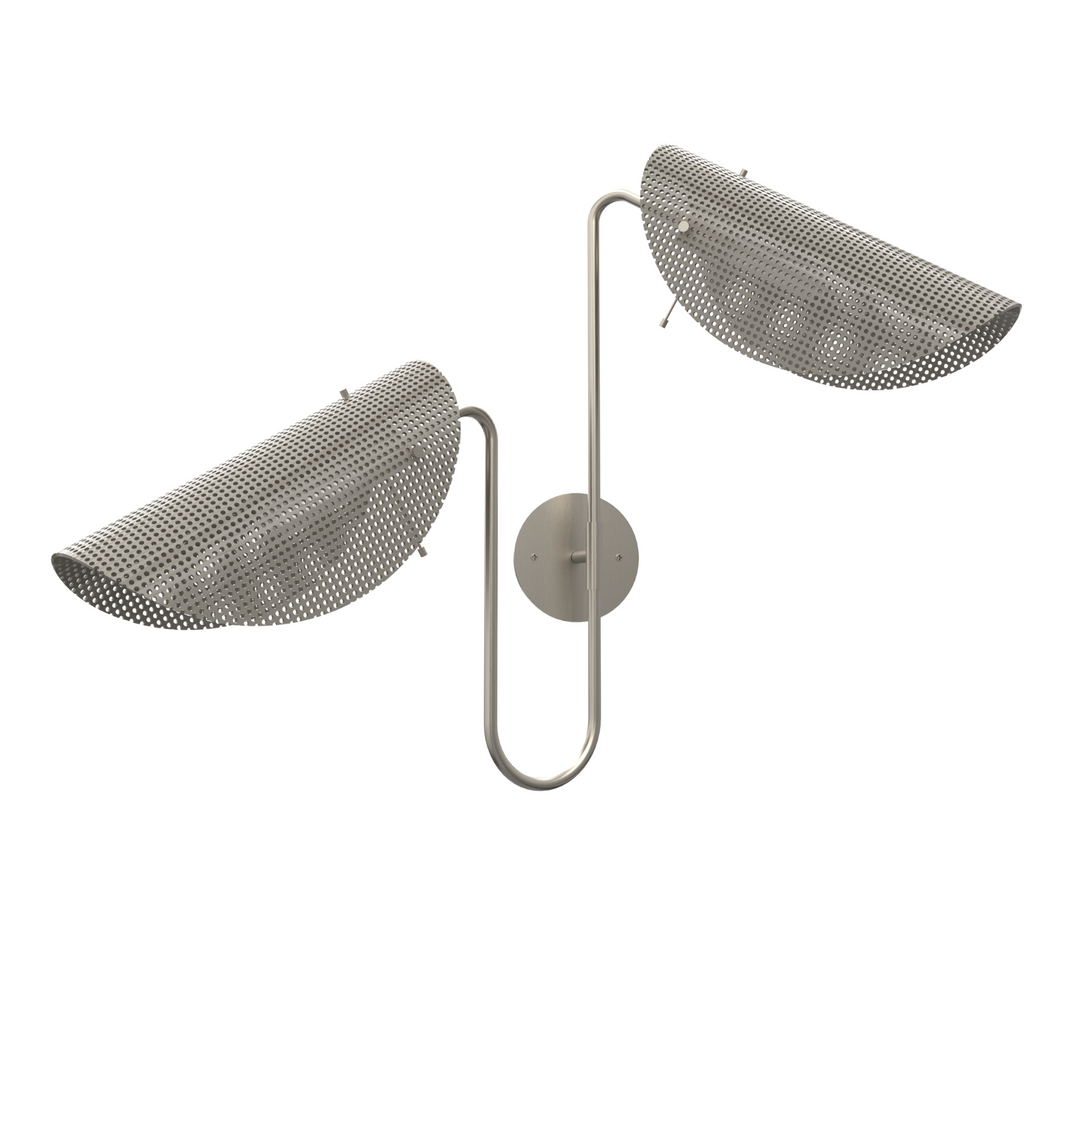 Tulle 2 Wall Lamp (Brushed Nickel/Pearl)